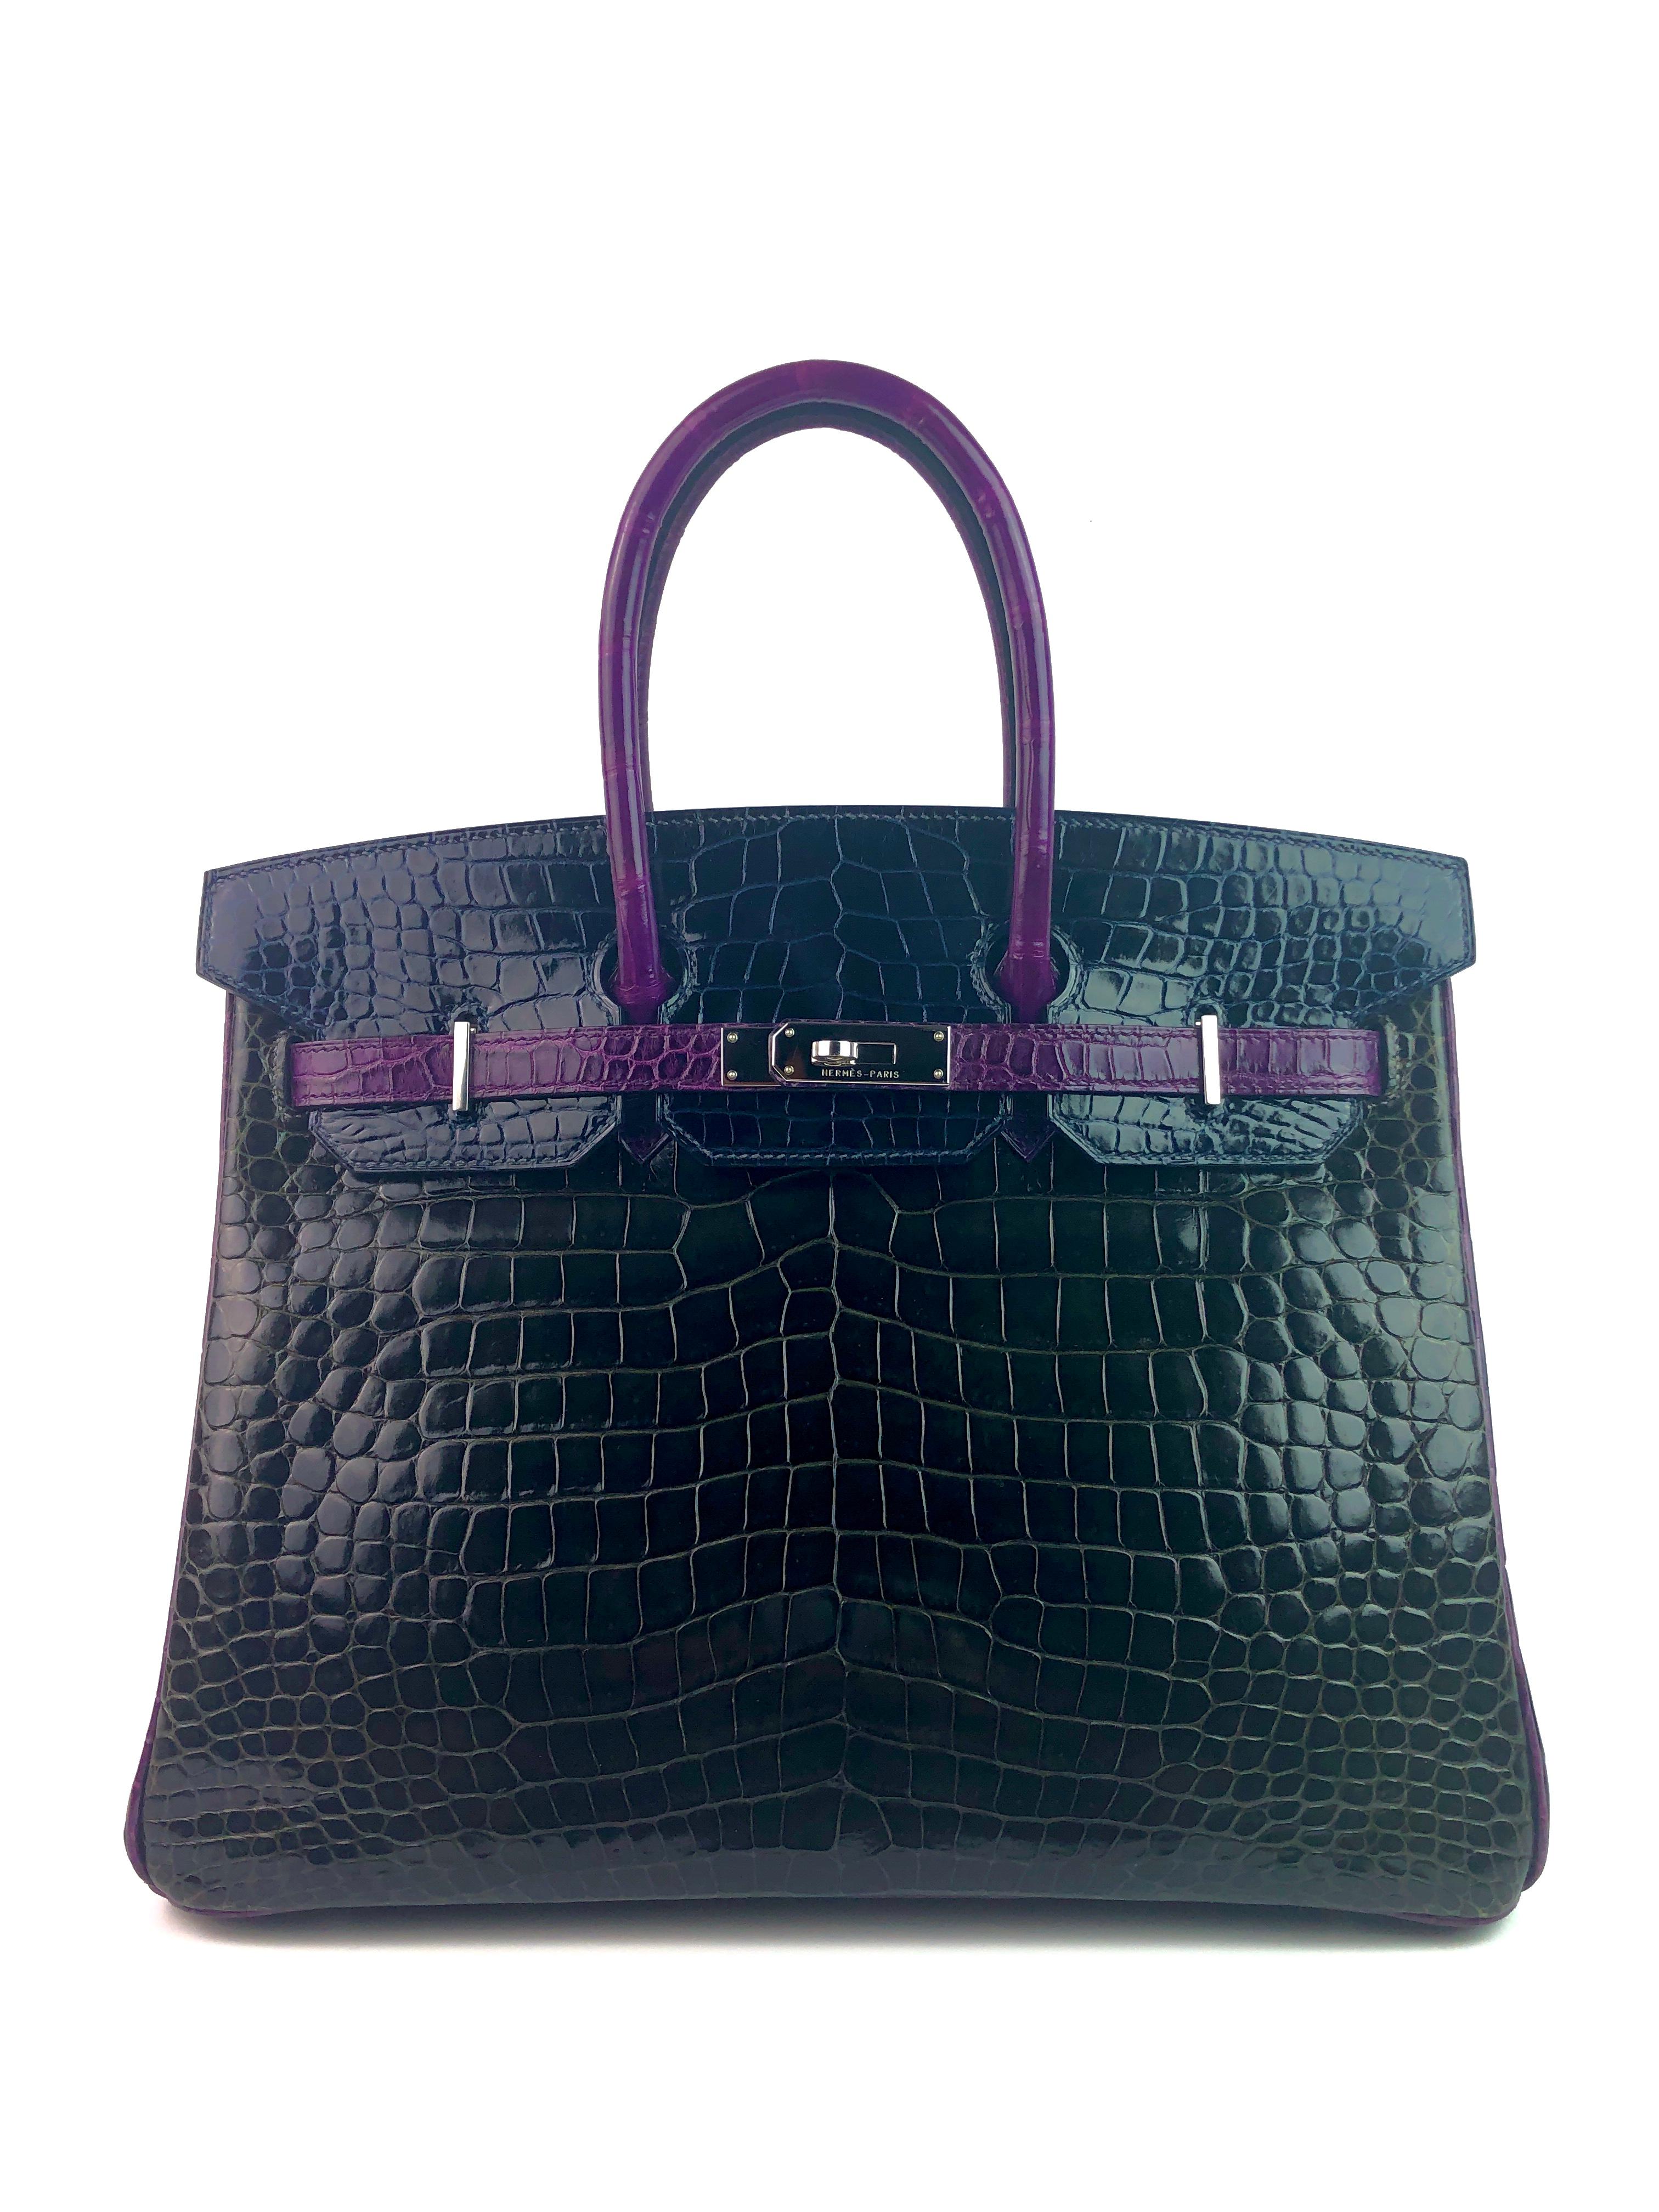 Hermes Birkin 35 HSS Special Oder Tri-Color Graphite Blue Marine Violet Crocodile. Excellent Condition Light Hairlines Best Price on eBay for Special Order! Includes Lock, Clochette, and Dust Bag. From Collectors Closet.

Shop with Confidence from